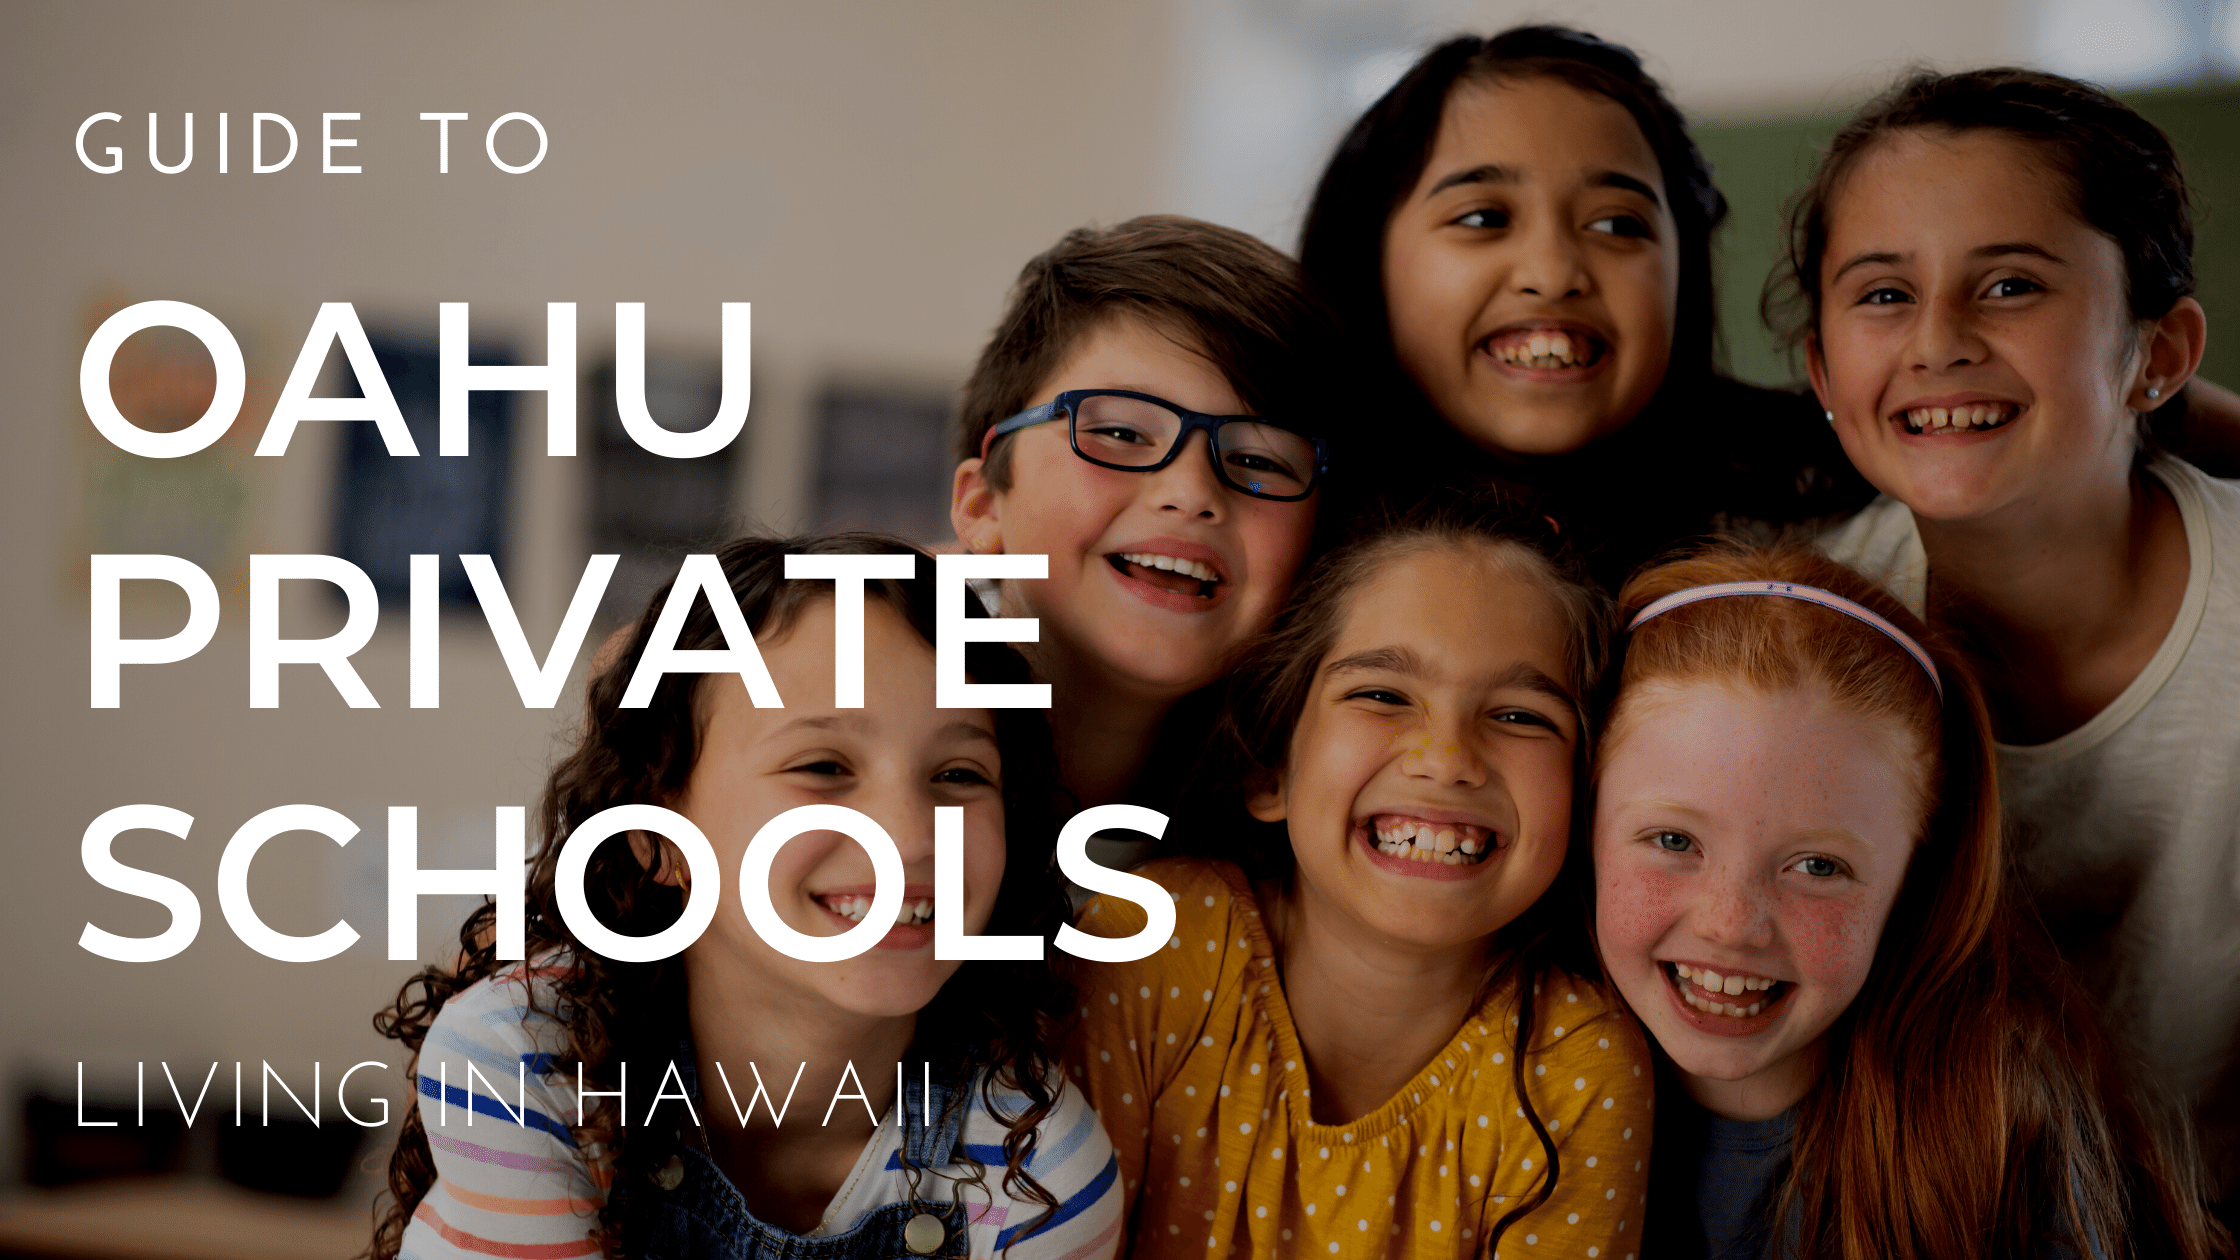 Hawaii Guide to Private Schools in Oahu